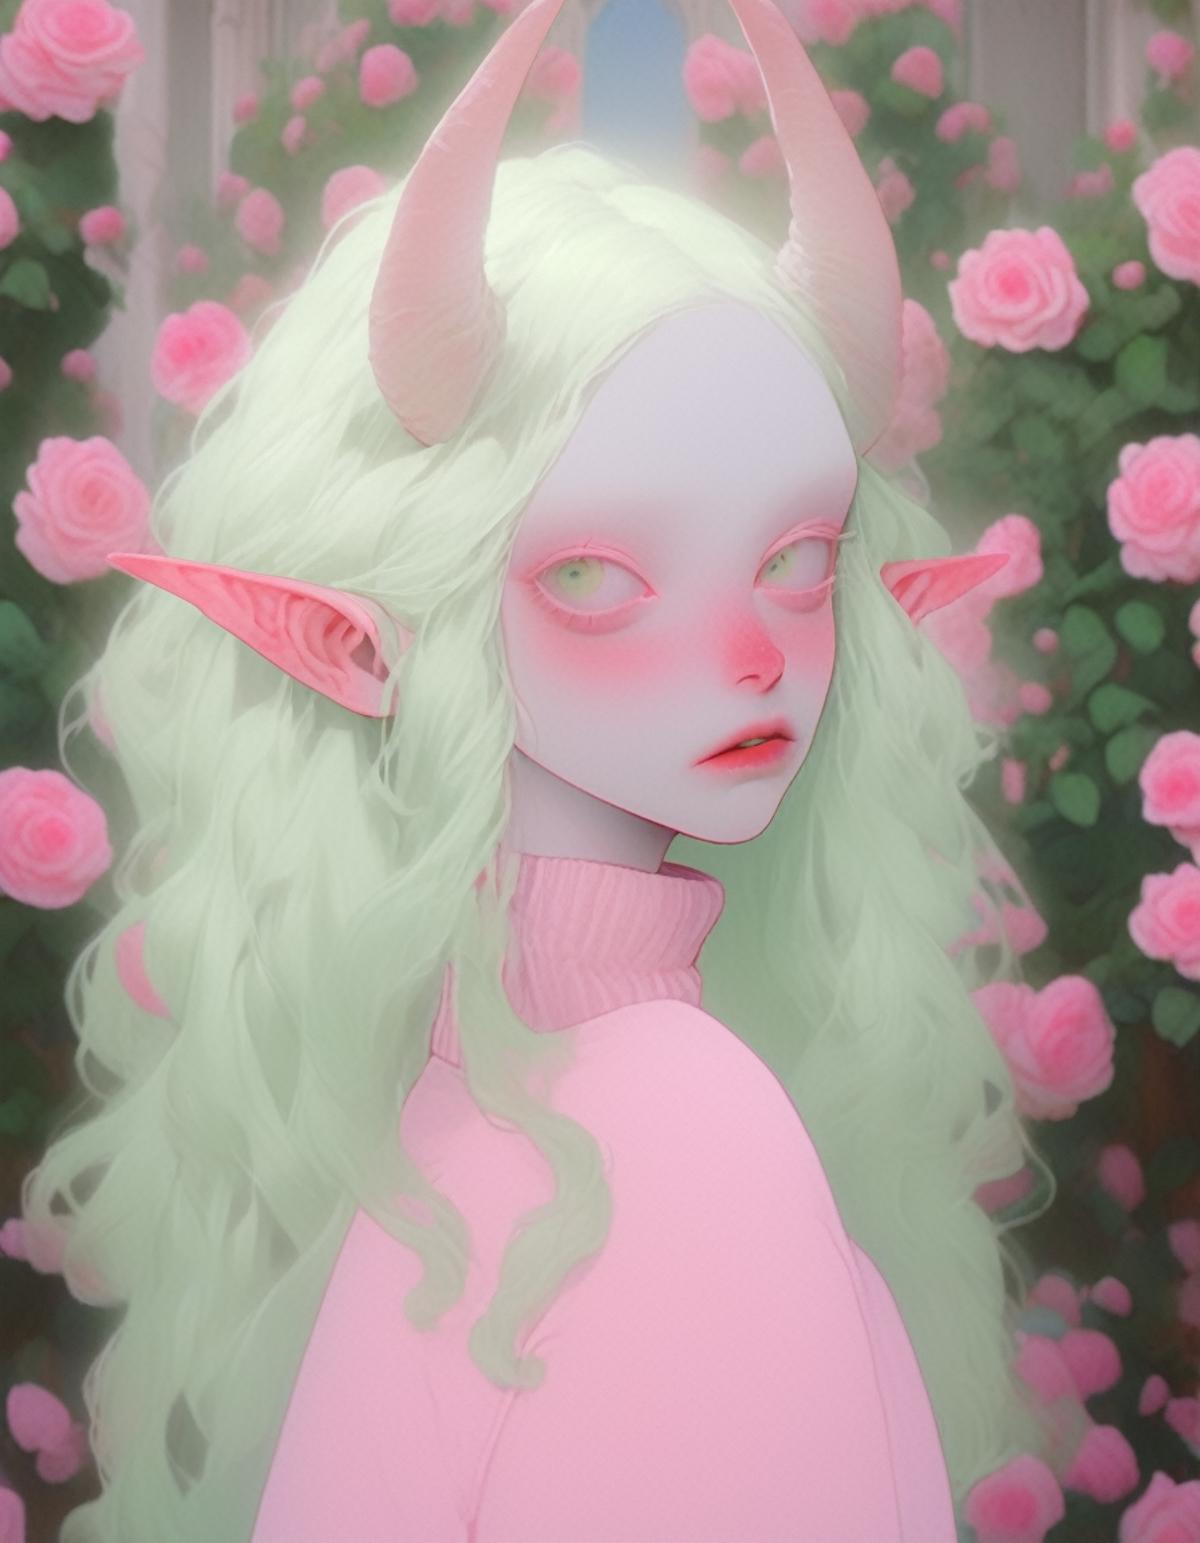 pale demon image by redbible